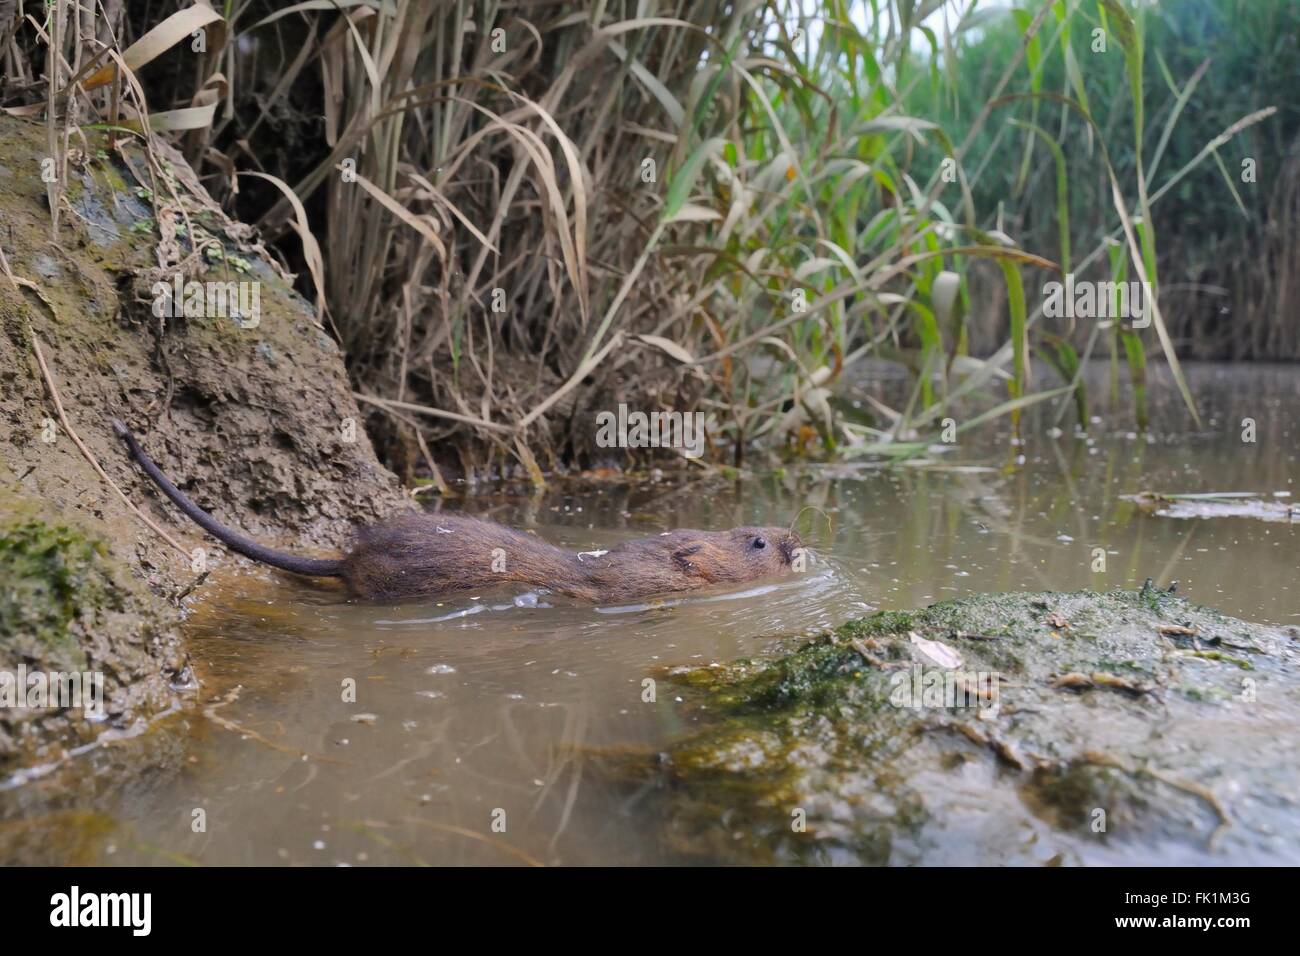 Water vole (Arvicola amphibius) swimming from river bank, low wide angle view, Bude marshes, Cornwall, UK Stock Photo